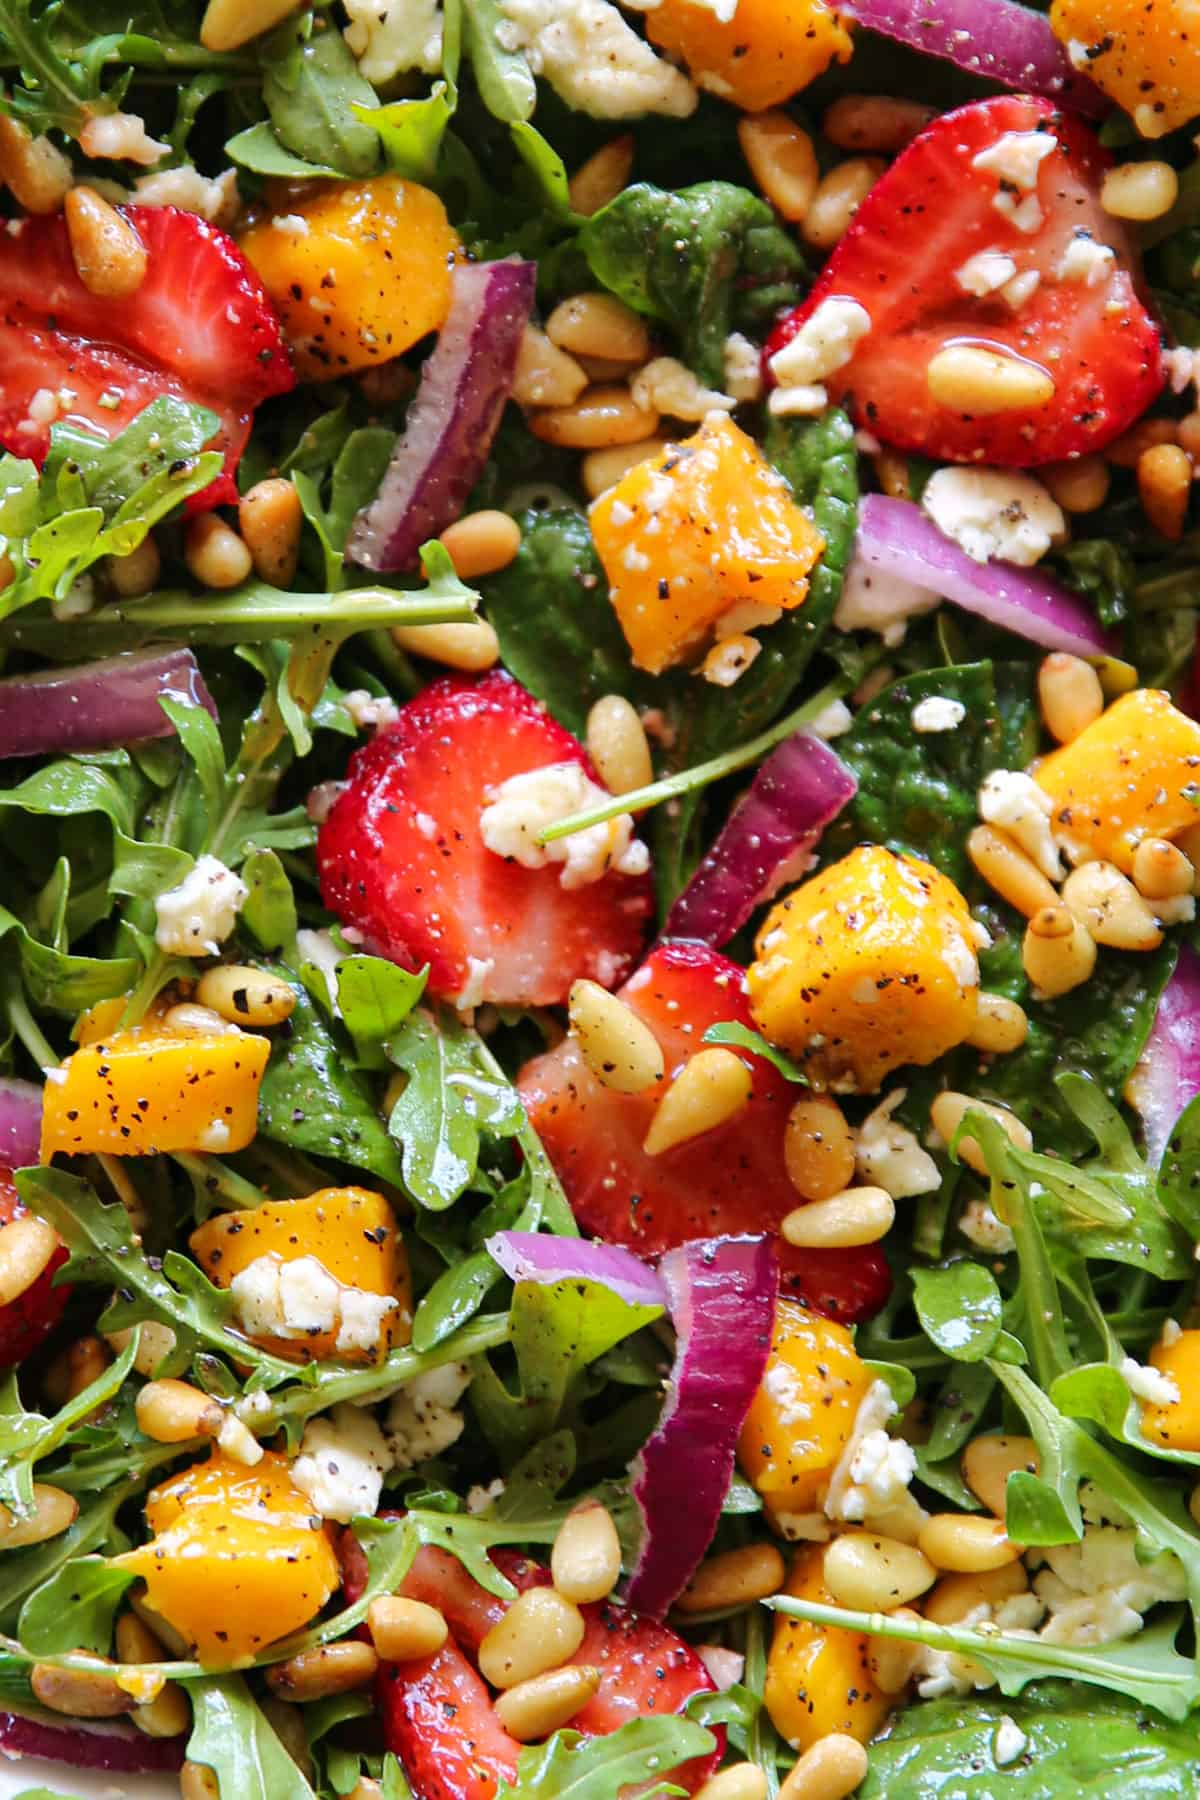 Strawberries and mango salad with fresh greens (arugula and spinach), sliced red onion, feta cheese, and pine nuts in a lemon honey mustard dressing - close-up photo.